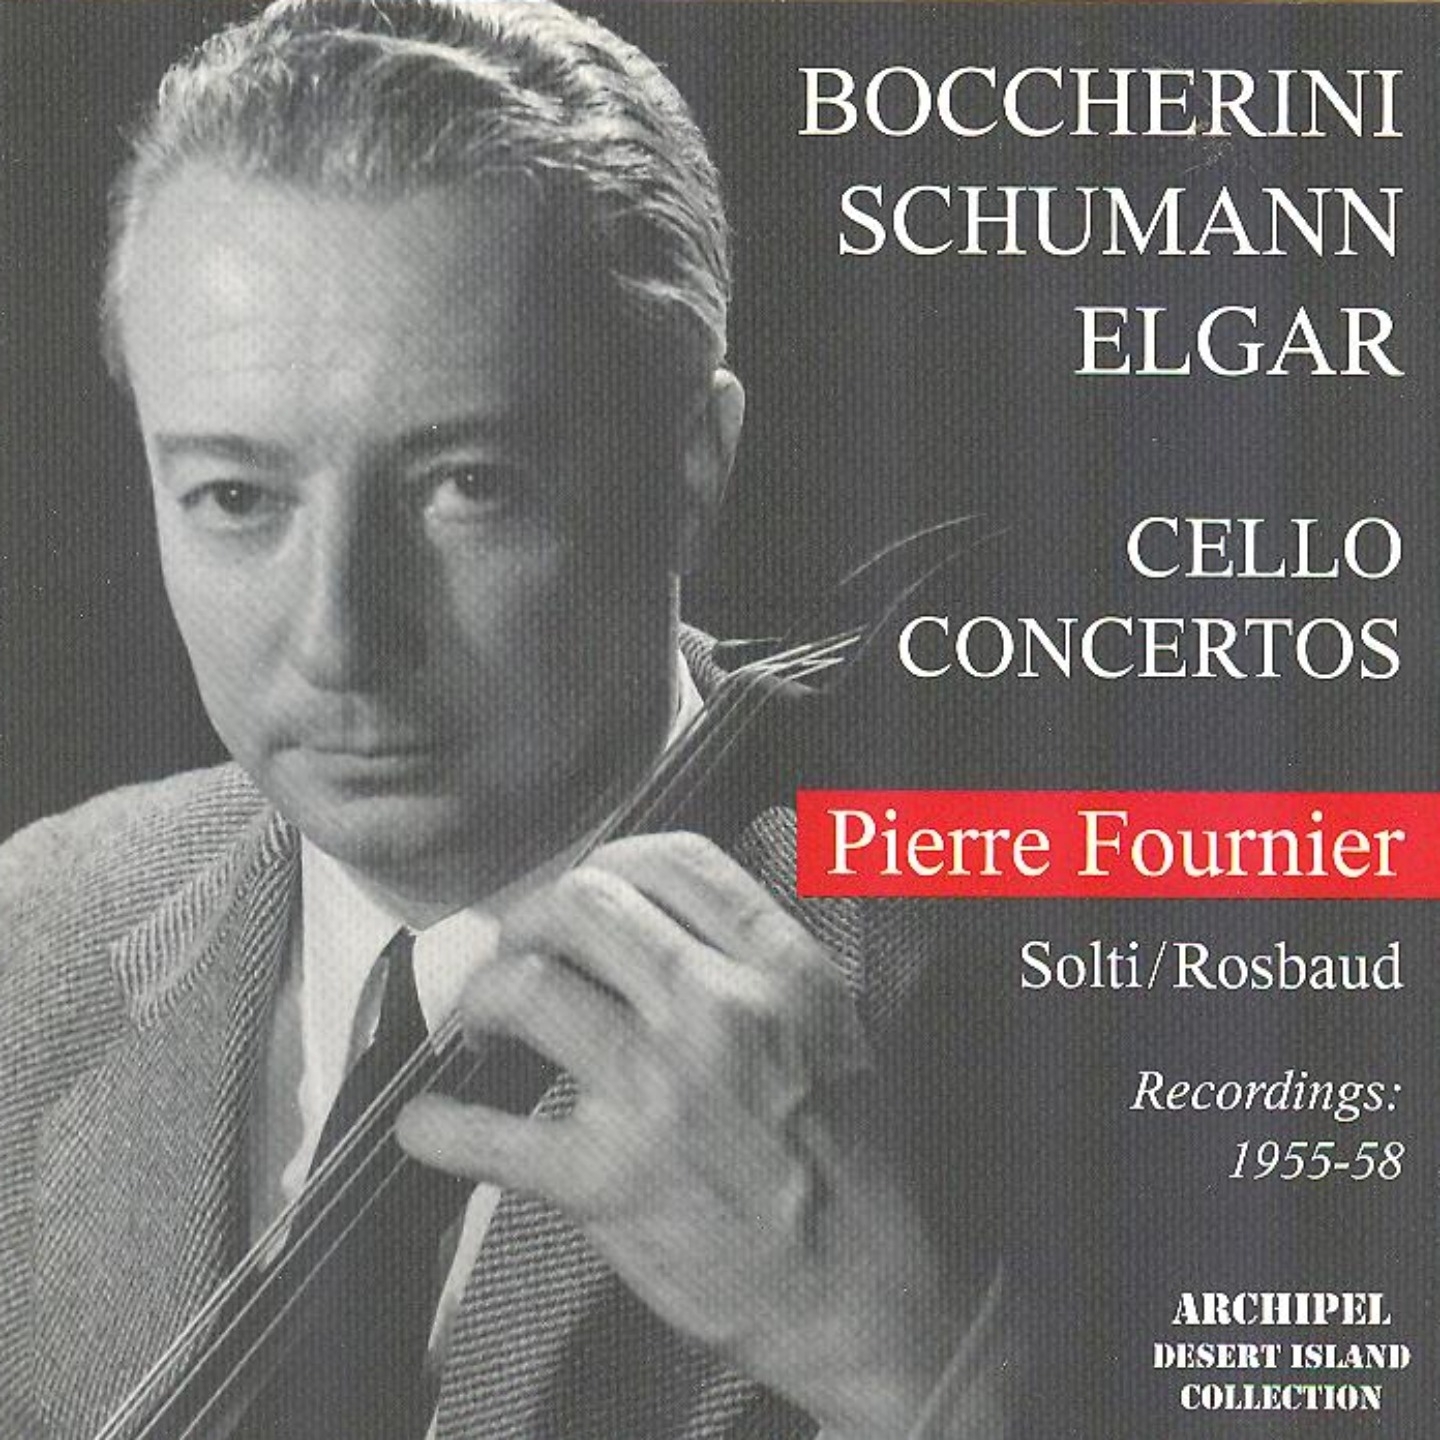 Concerto for Cello and Ochestra In A Minor, Op. 129: I. Nicht zu schnell